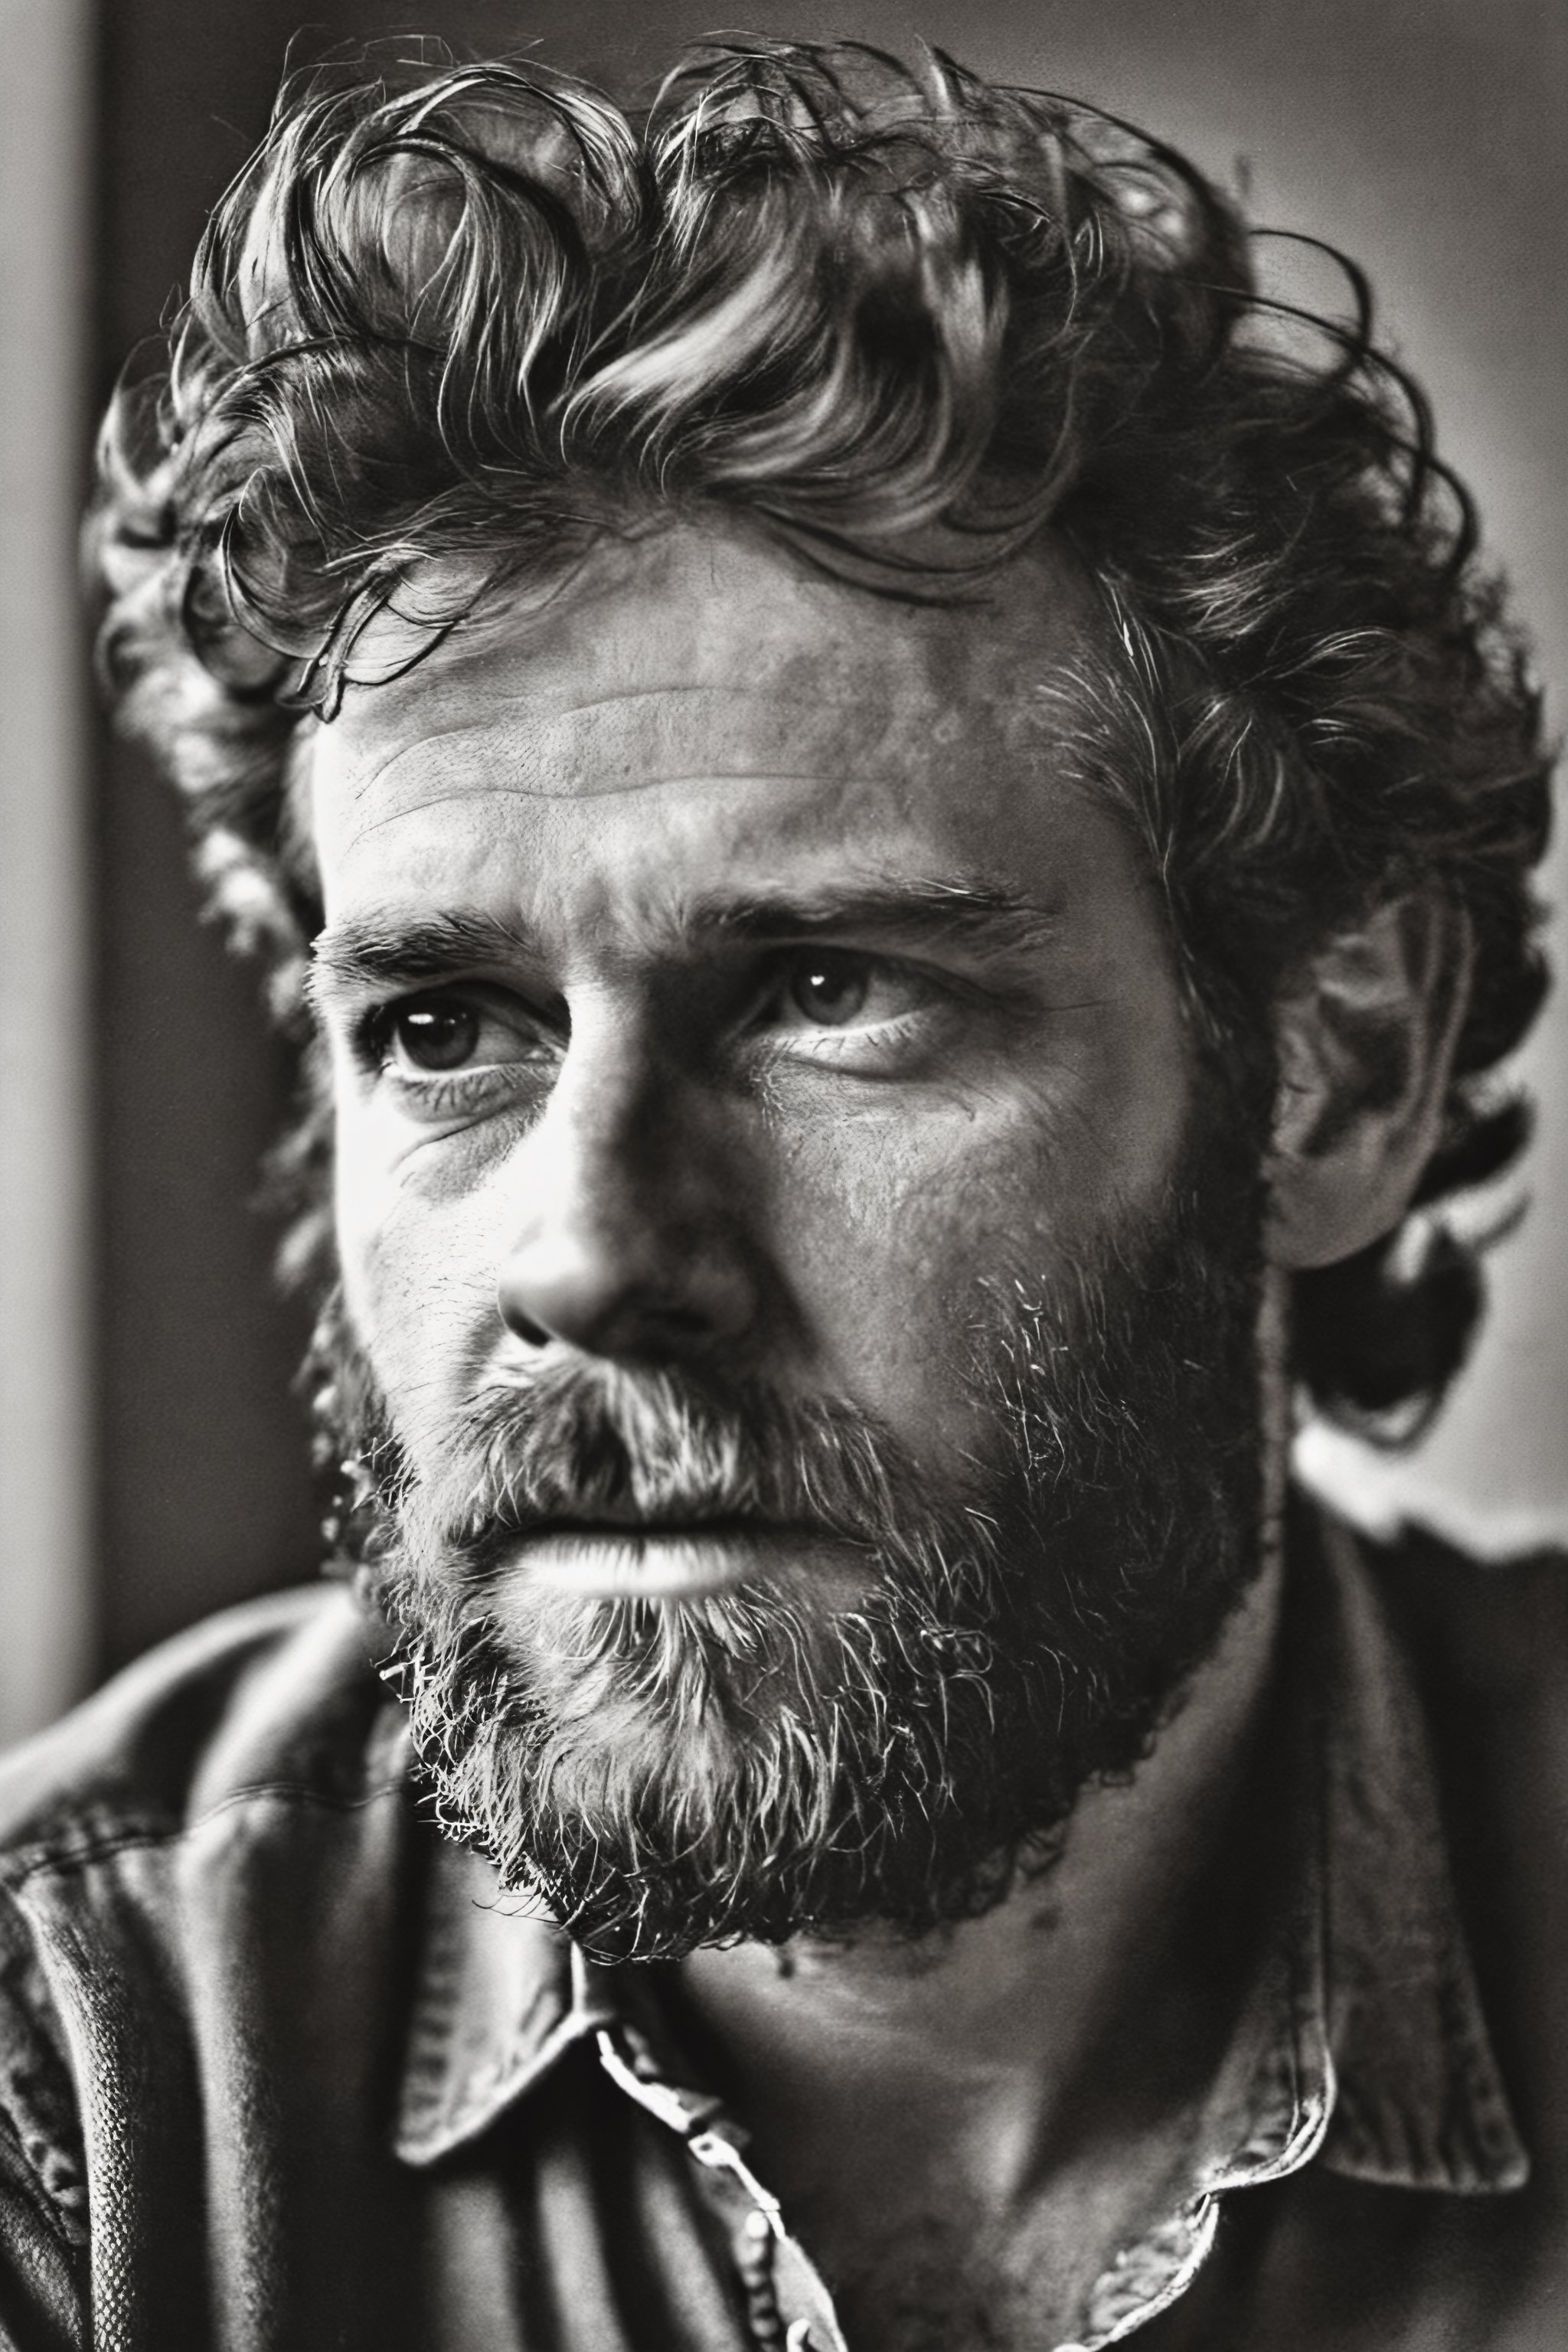 The image is a black and white photo of a man with long, curly hair and a beard. He appears to be looking off into the distance, deep in thought or observing something. The man's hair is disheveled, adding a sense of realism and character to the photograph. The photo is slightly blurry, giving it a more artistic and nostalgic feel. It seems to have been taken with an older camera or intentionally edited to achieve the desired effect. Overall, the image captures a moment in time, showcasing the man's unique appearance and demeanor





